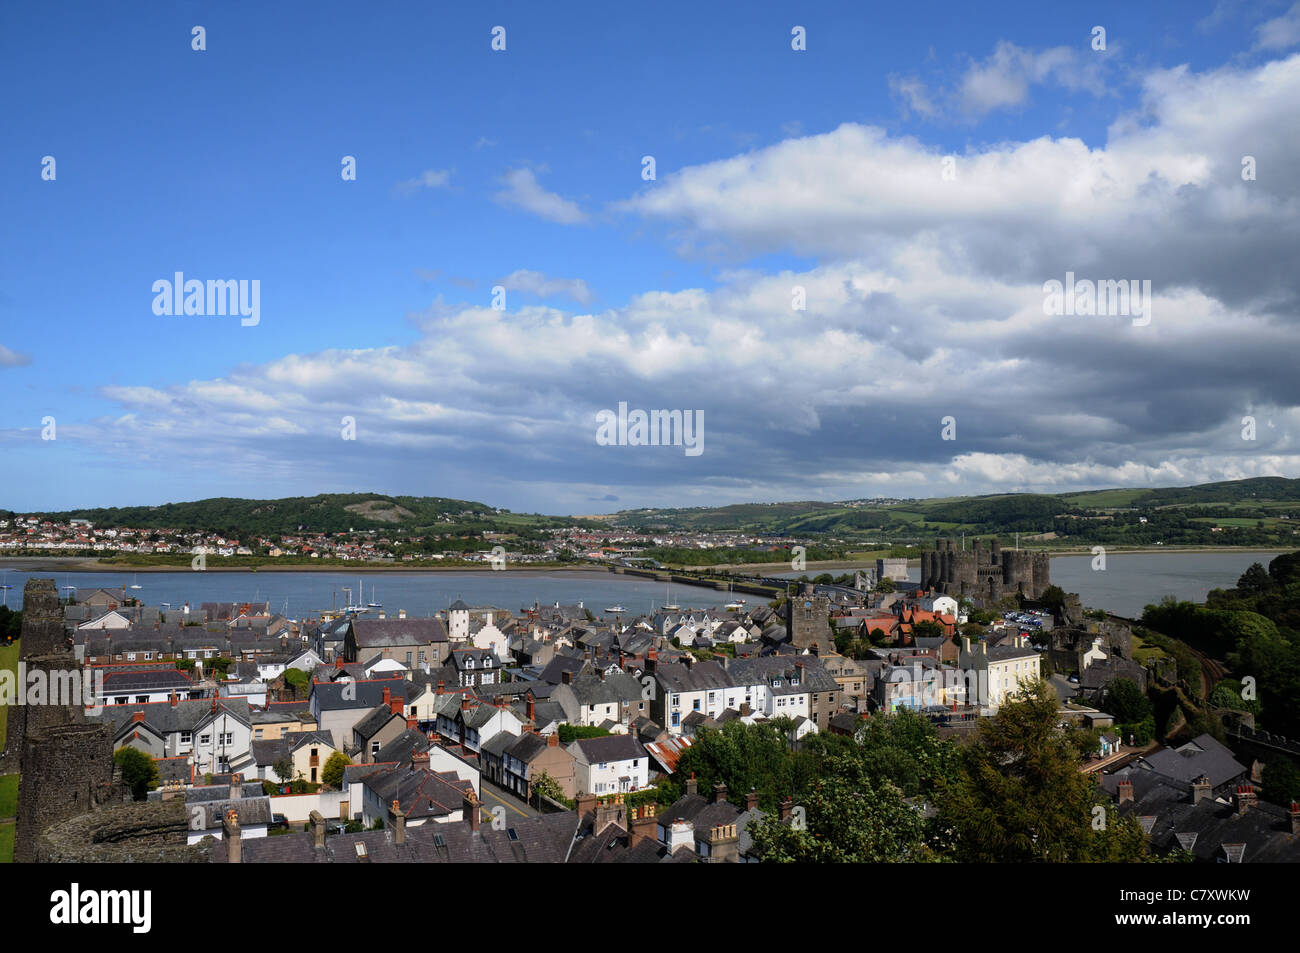 VIEW OF CONWY CASTLE FROM THE TOWN WALLS OF CONWY, NORTH WALES Stock Photo